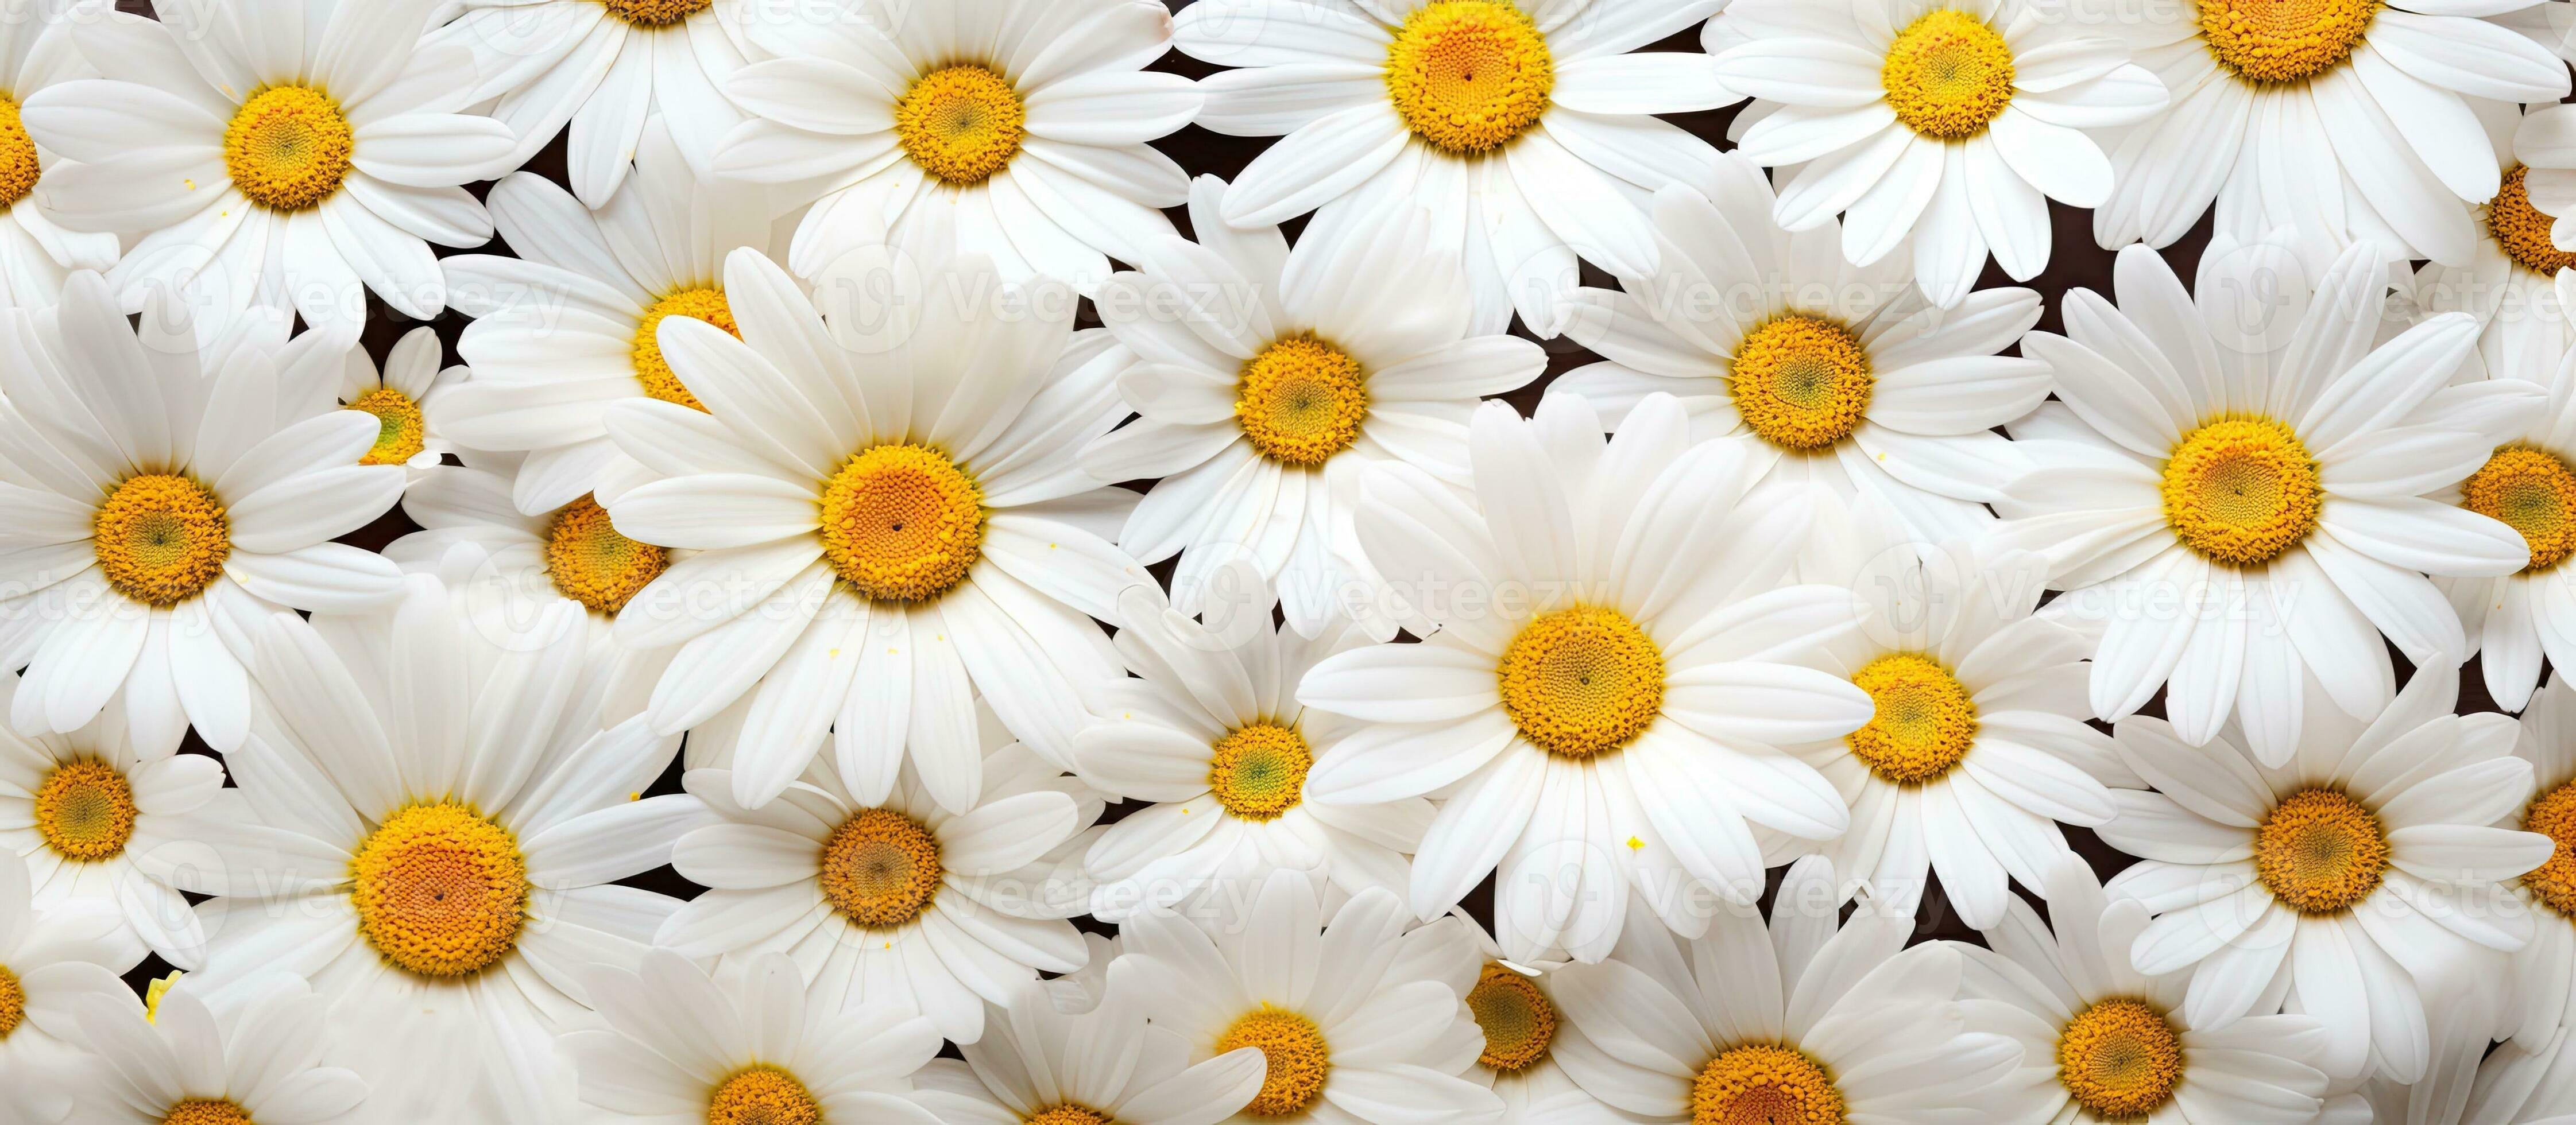 Daisies, white flowers with yellow centers, create a spring or summer  background with room for 27099842 Stock Photo at Vecteezy